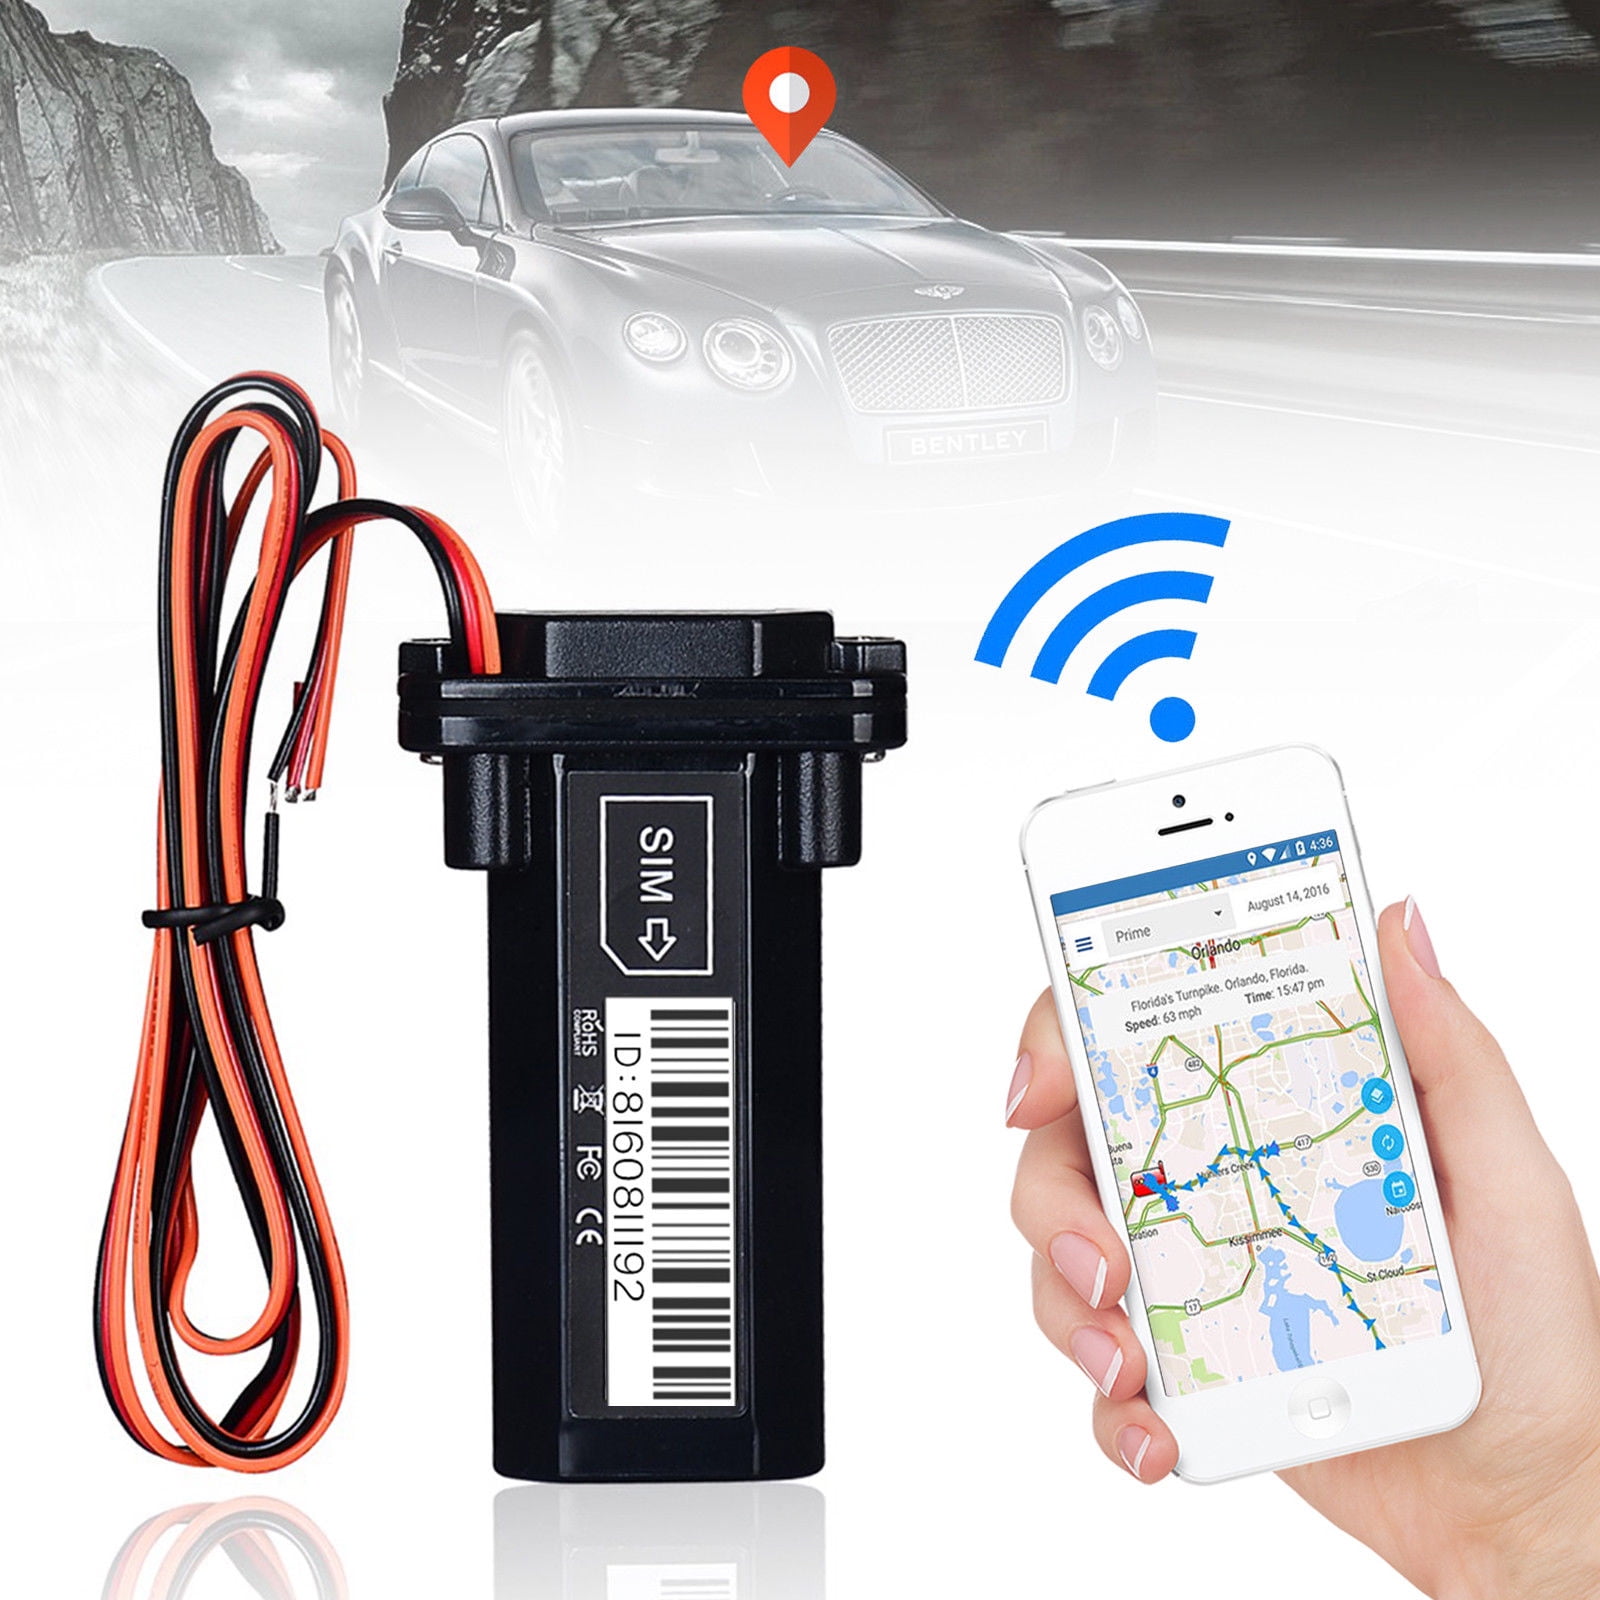 Realtime Car GPS Tracker GSM Alarm Anti-Theft Tracking Device for Car/Vehicle/Motorcycle, Size: 79 in